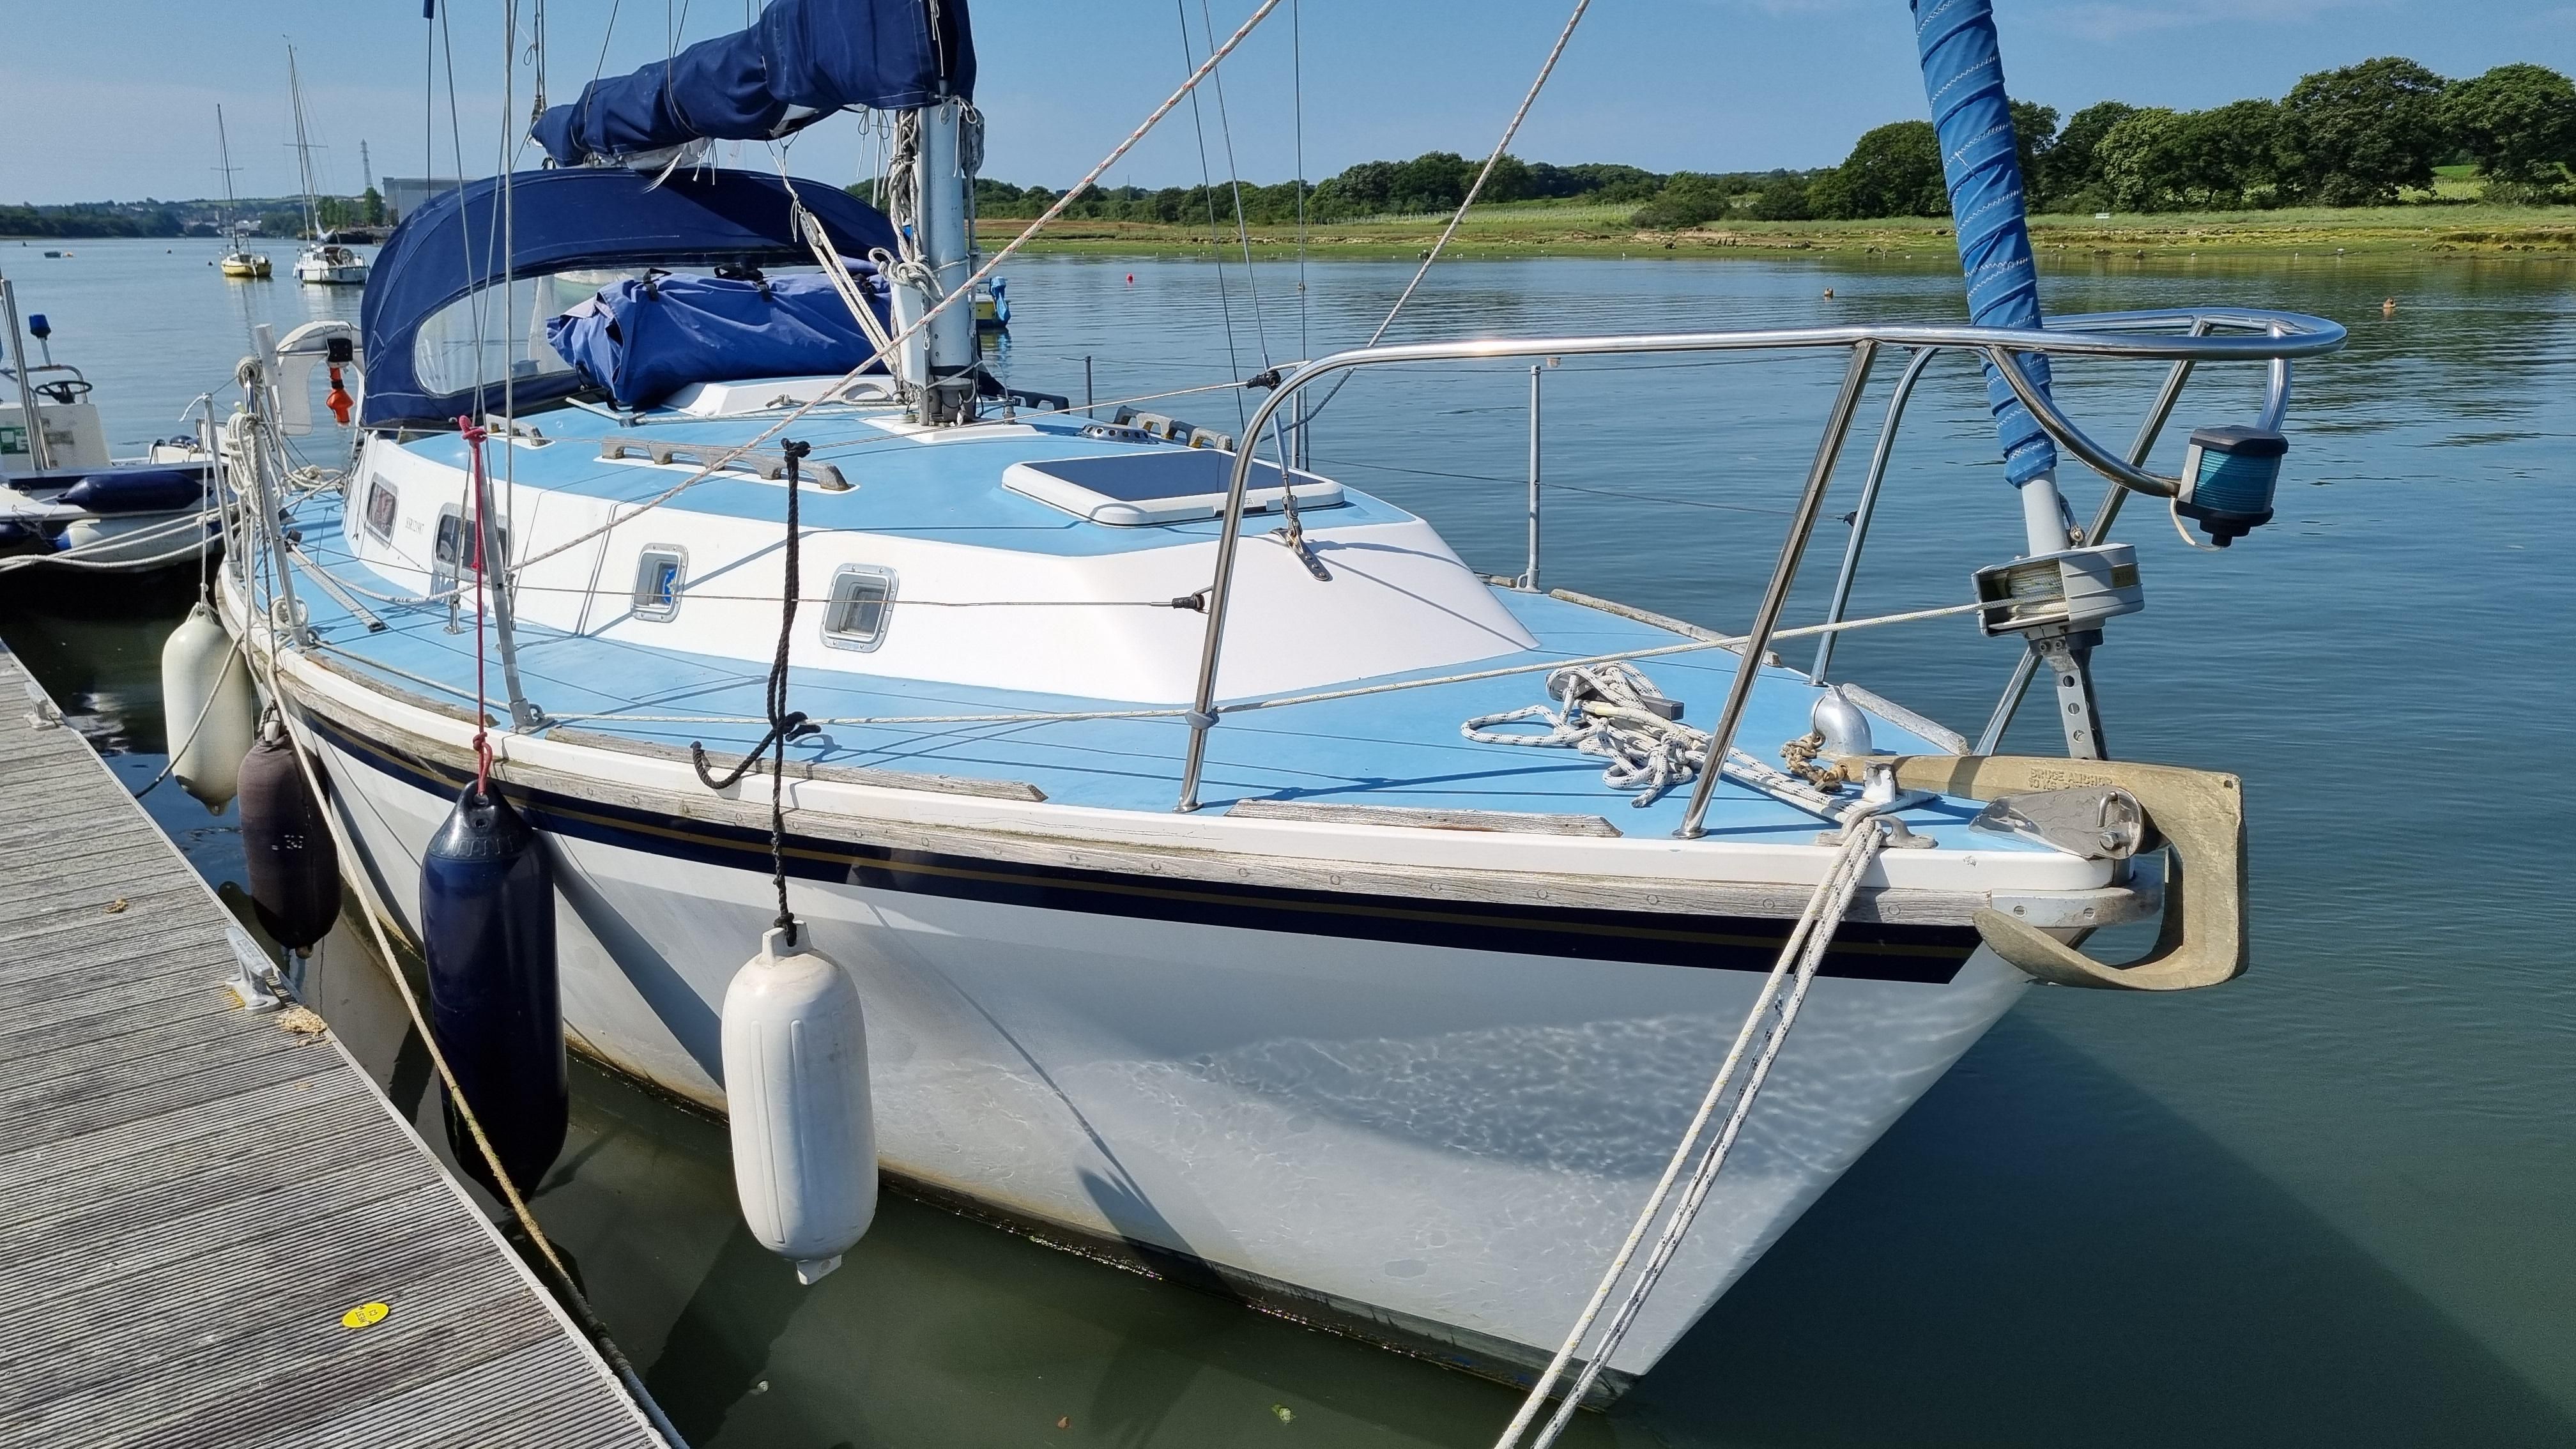 westerly yachts for sale in the uk